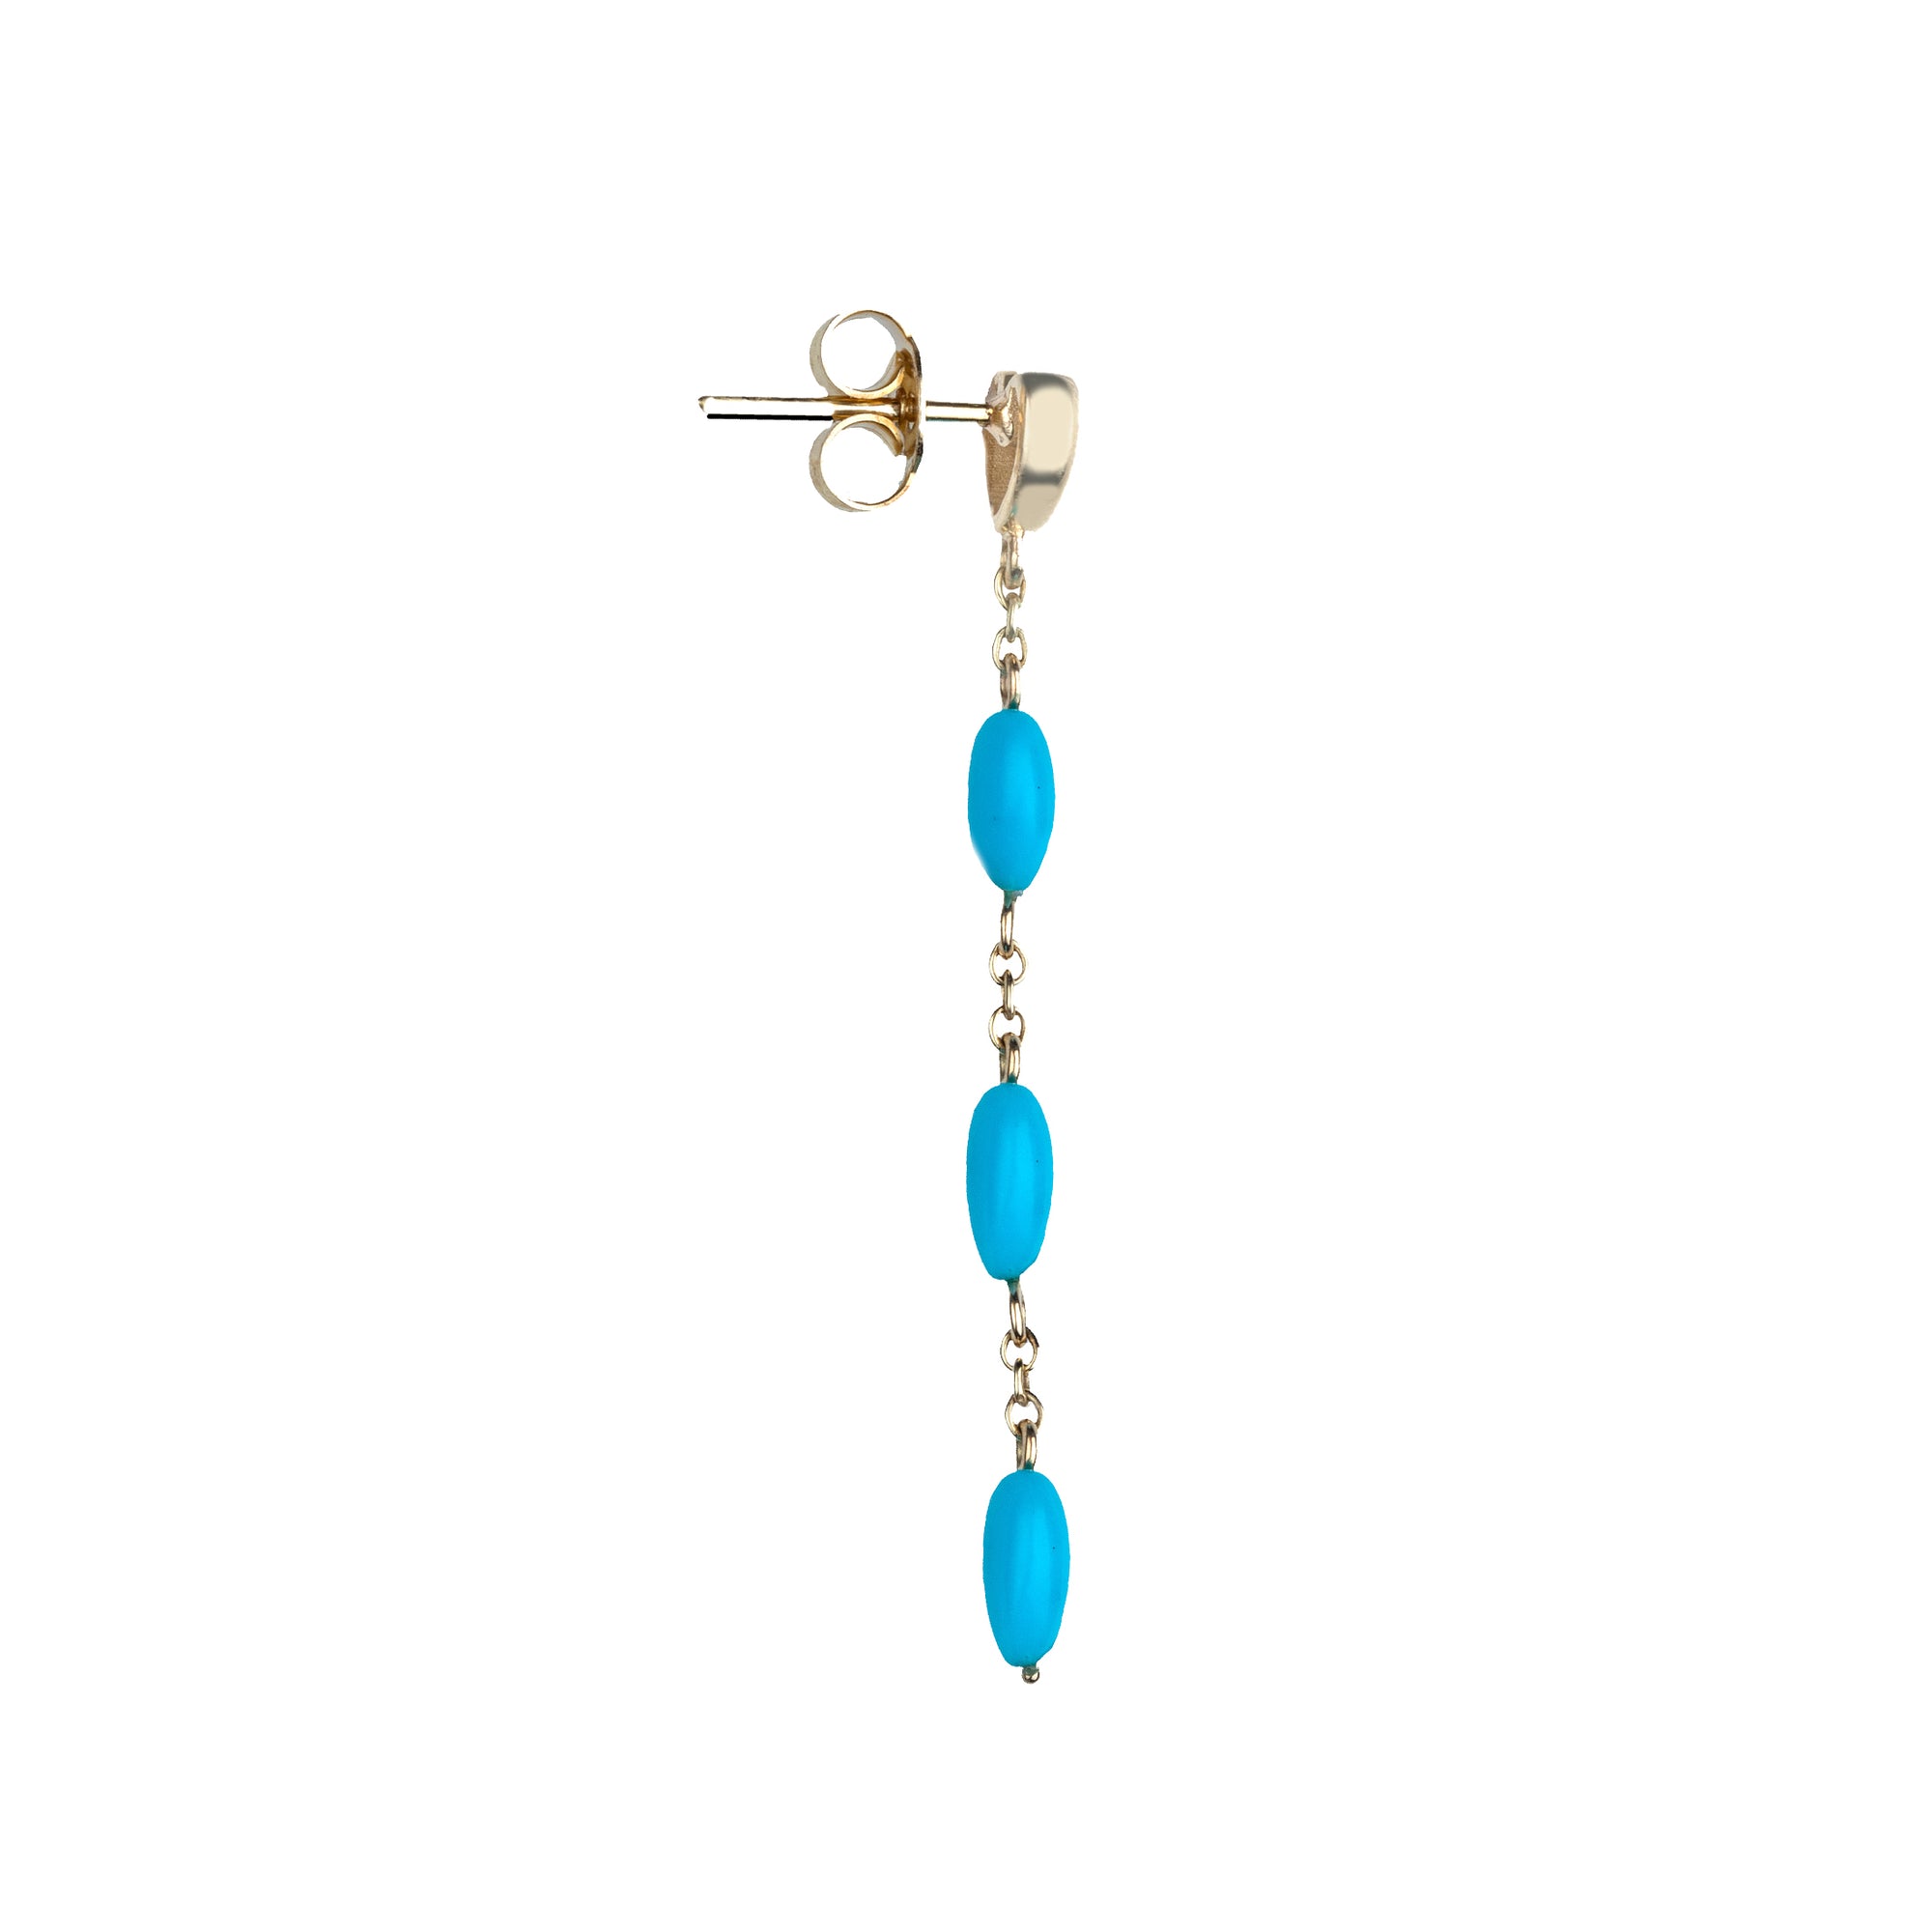 LOVE Carved Turquoise and Gold Heart Earrings